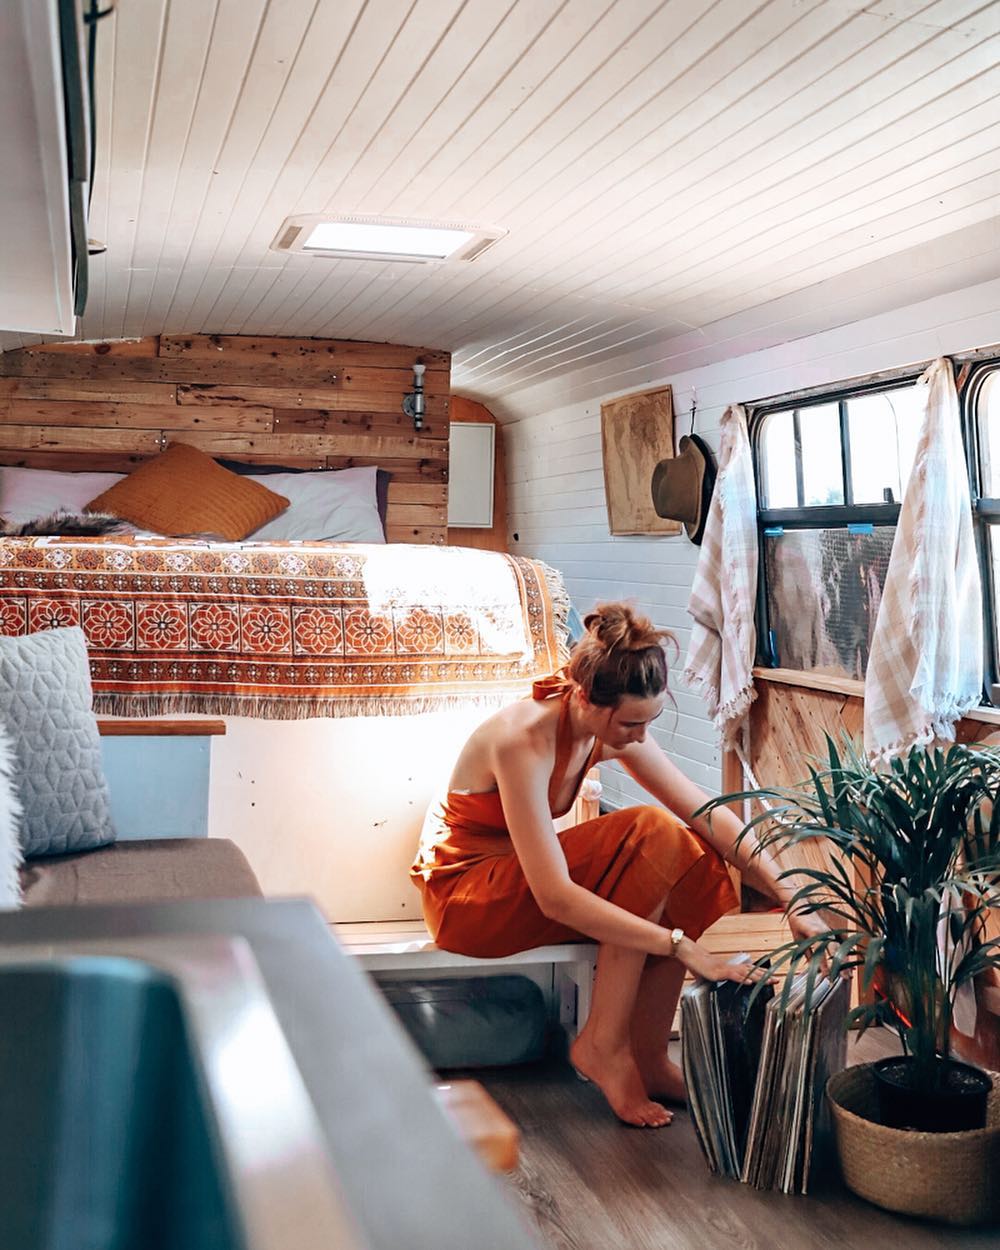 Woman Looking at Different Carpet Samples While Sitting in Her Tiny Home. Photo by Instagram user @gooseandellen